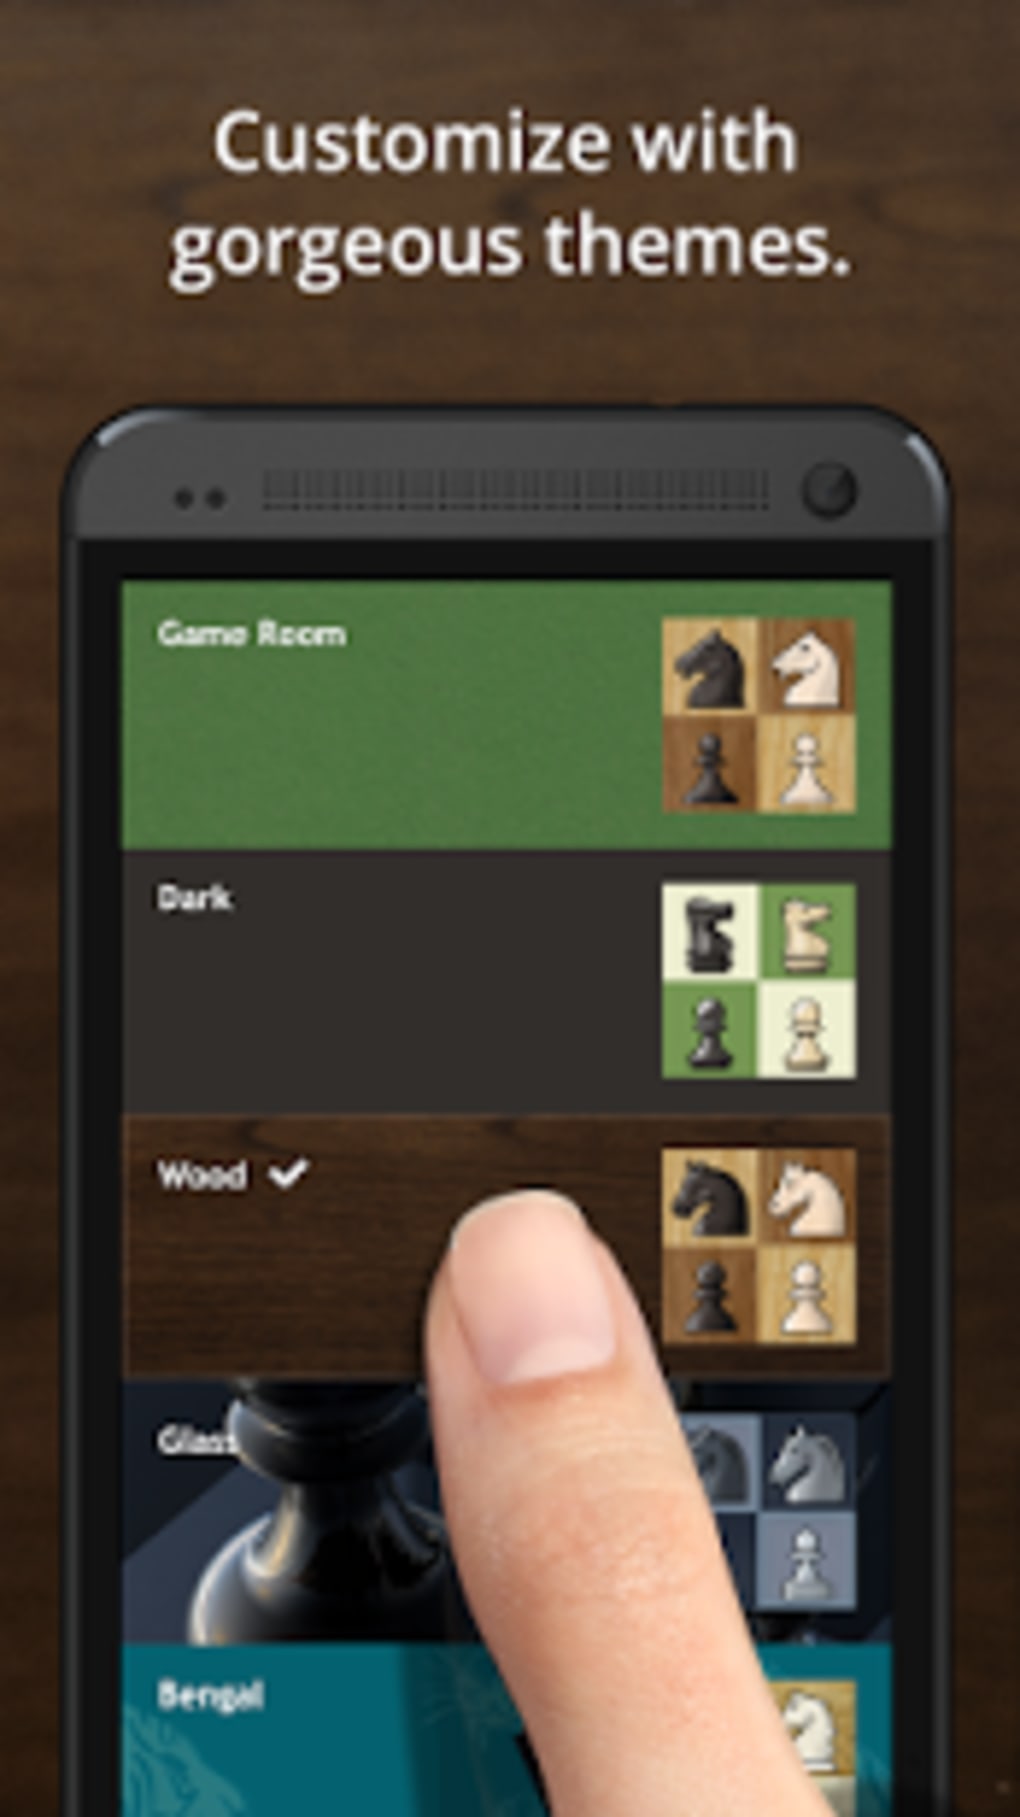 Chessle APK (Android Game) - Kostenloser Download